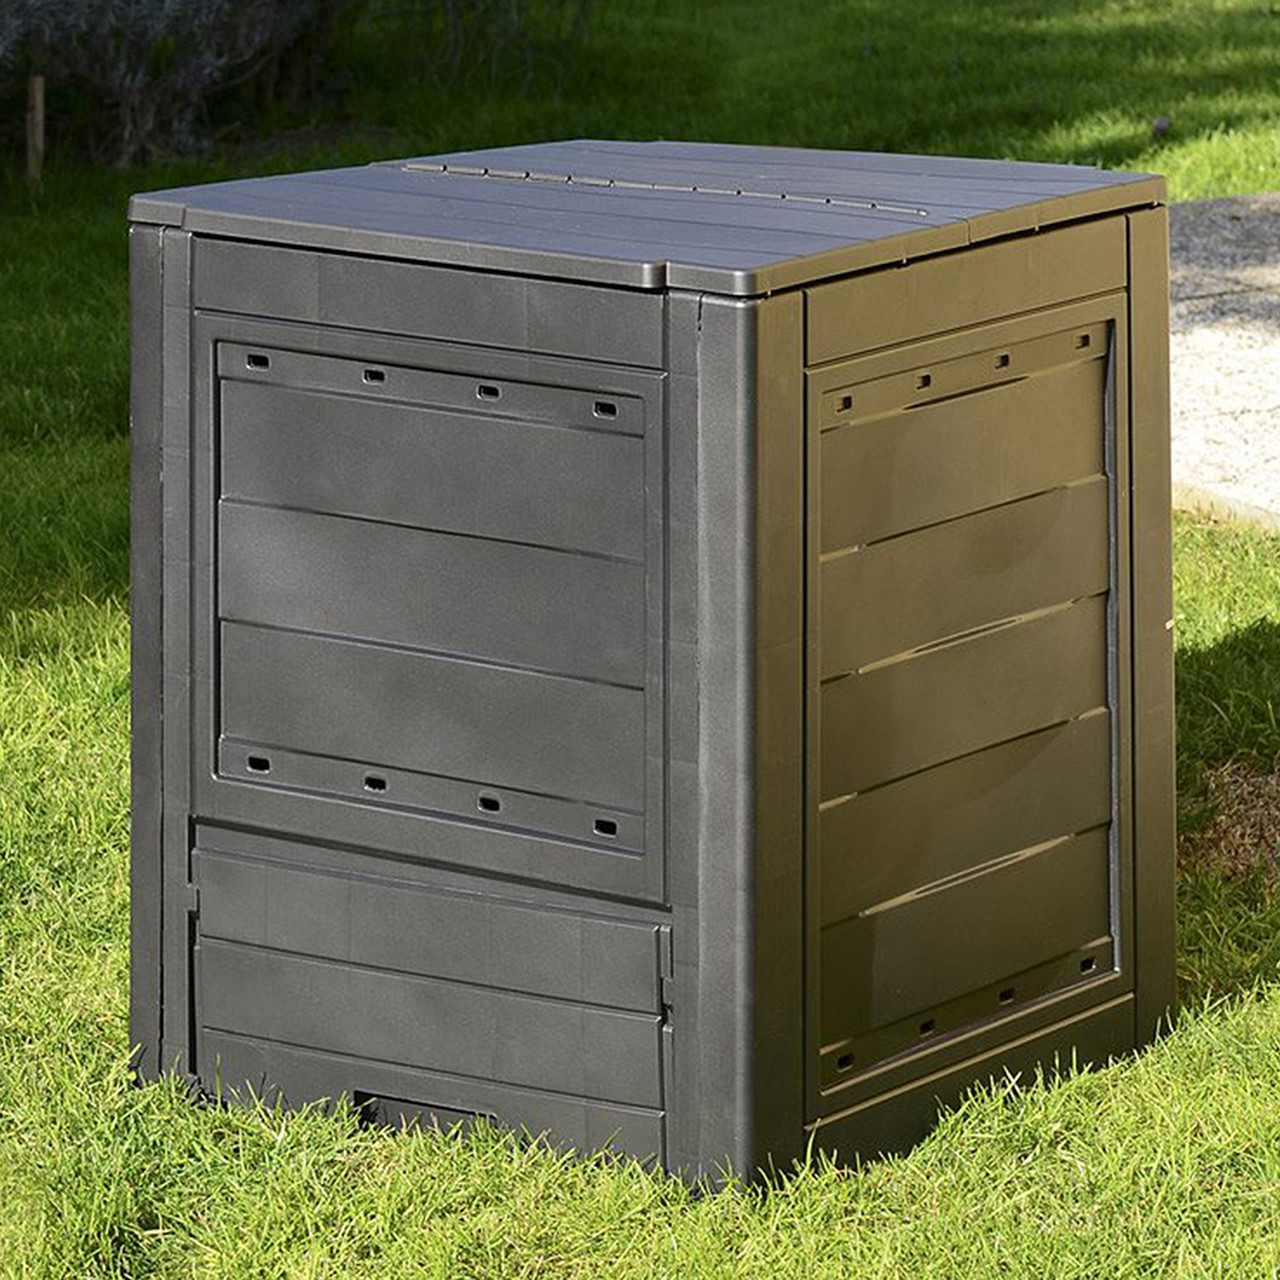 Toomax 68 gal. Black Resin Composter Box - 24 x 24 x 29 in.